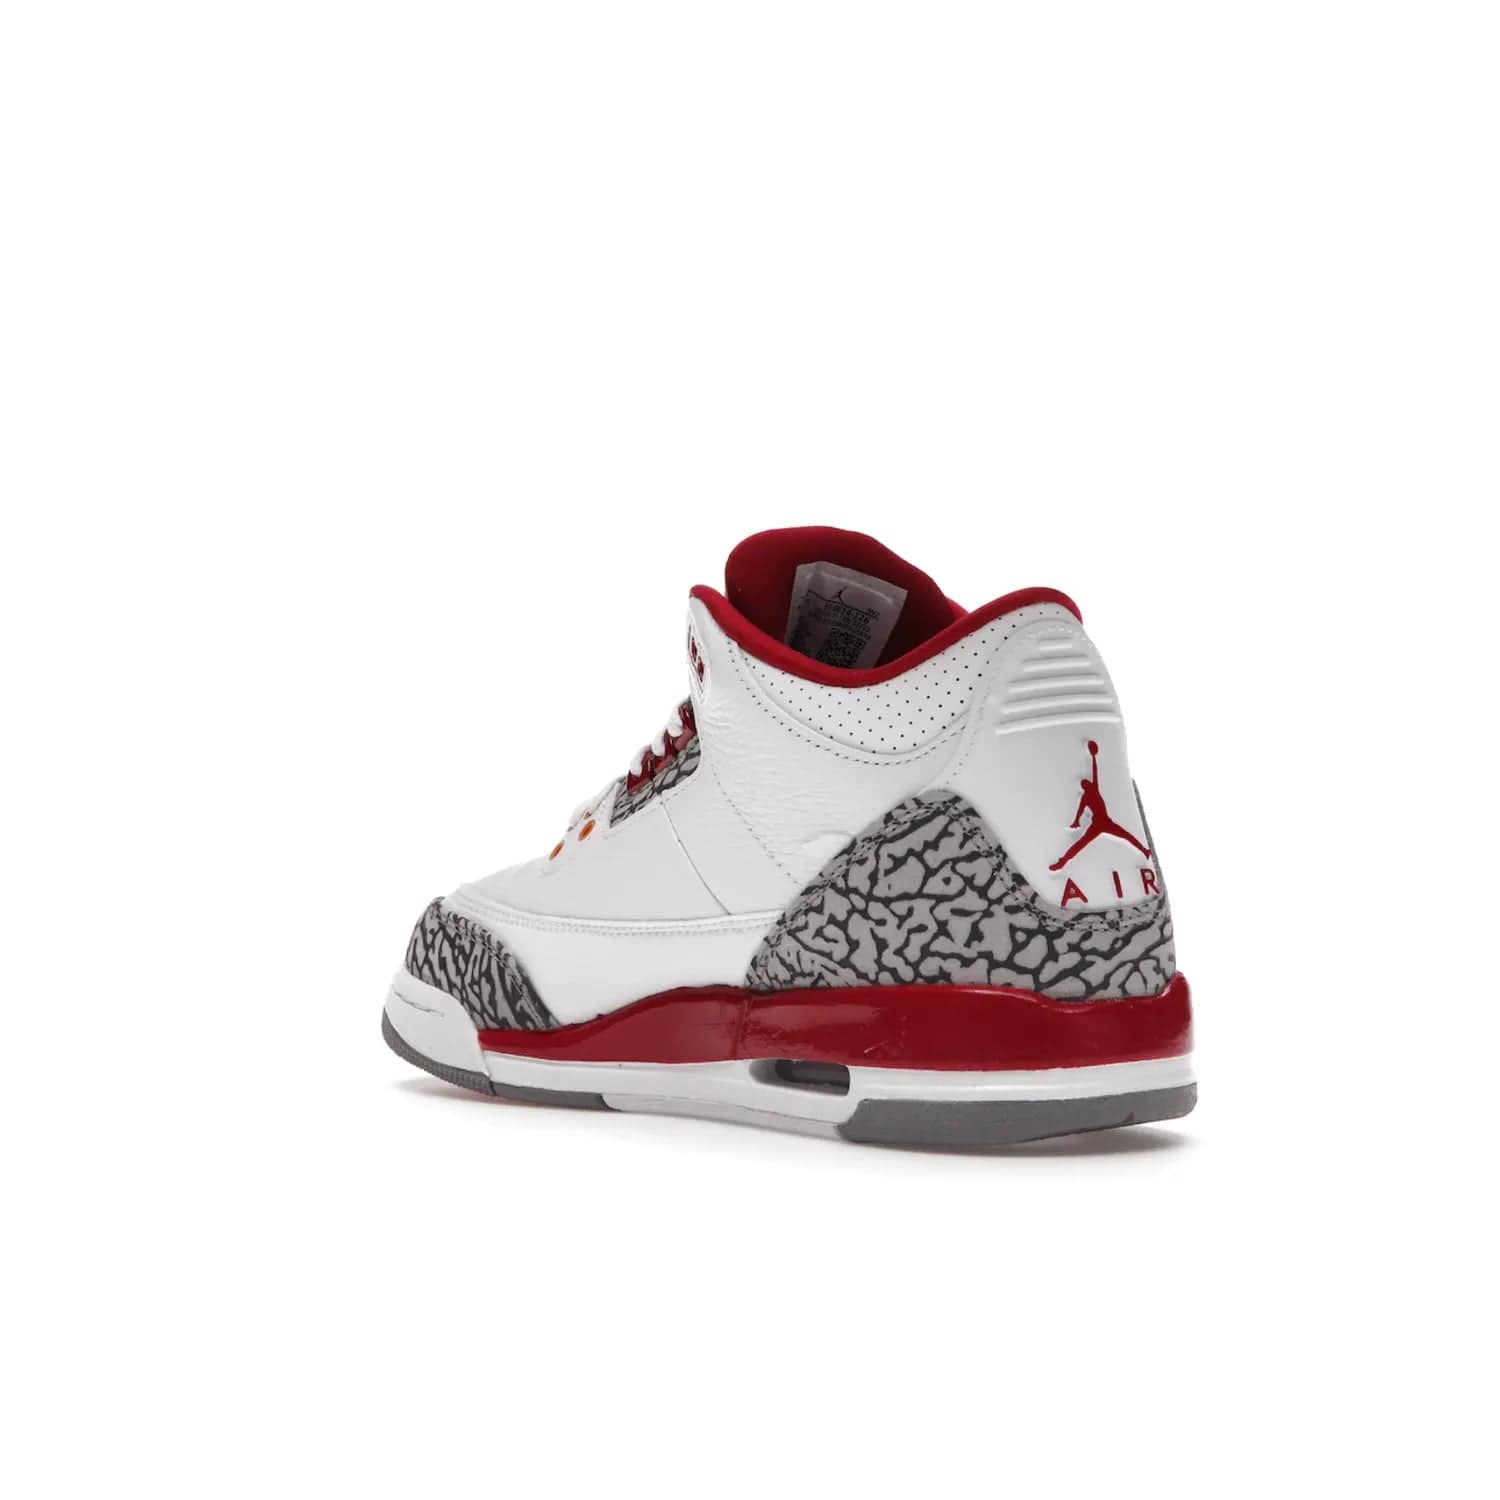 Jordan 3 Retro Cardinal (GS) - Image 24 - Only at www.BallersClubKickz.com - Shop the kid-sized Air Jordan 3 Retro Cardinal GS, released Feb 2022. White tumbled leather upper, light curry accenting, cement grey and classic red details throughout. Visible Air cushioning, midsole, and an eye-catching outsole. Show off your style with this fashionable streetwear silhouette.